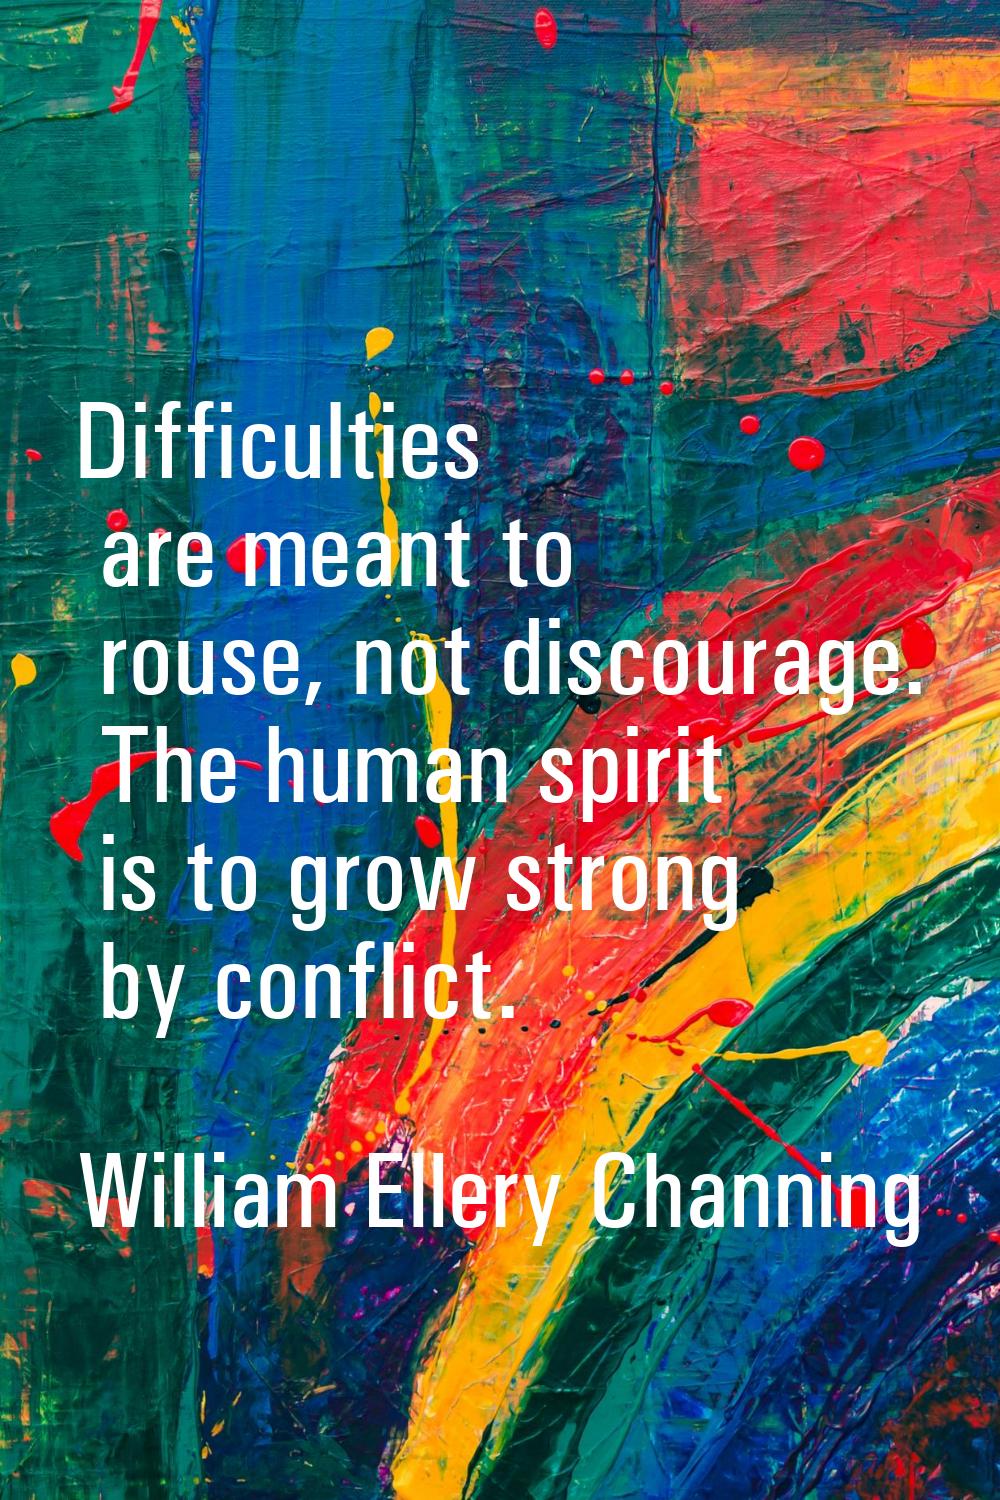 Difficulties are meant to rouse, not discourage. The human spirit is to grow strong by conflict.